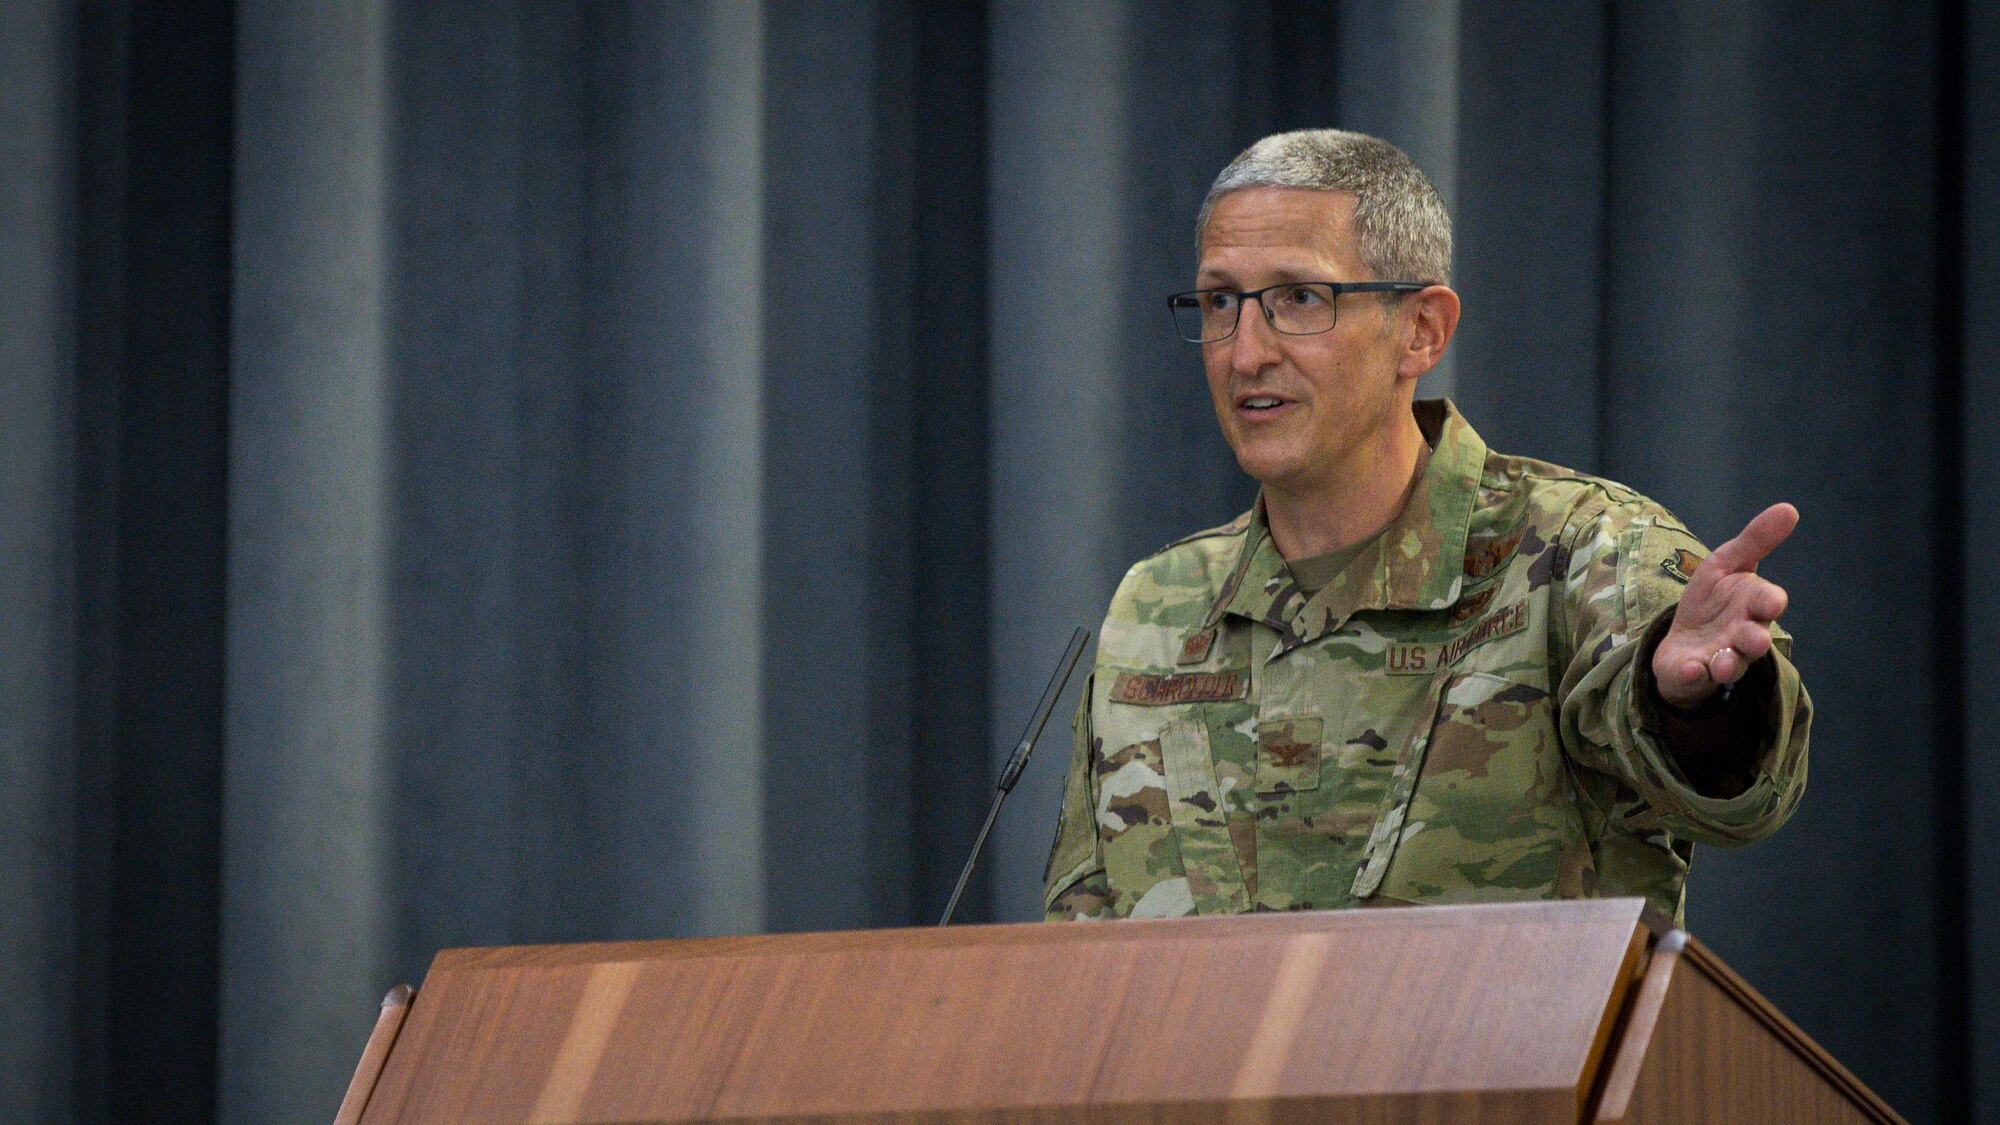 Col. Erich W. Schroeder, incoming 2nd Medical Group commander, addresses the crowd during a change of command ceremony at Barksdale Air Force Base, La., July 10, 2020.